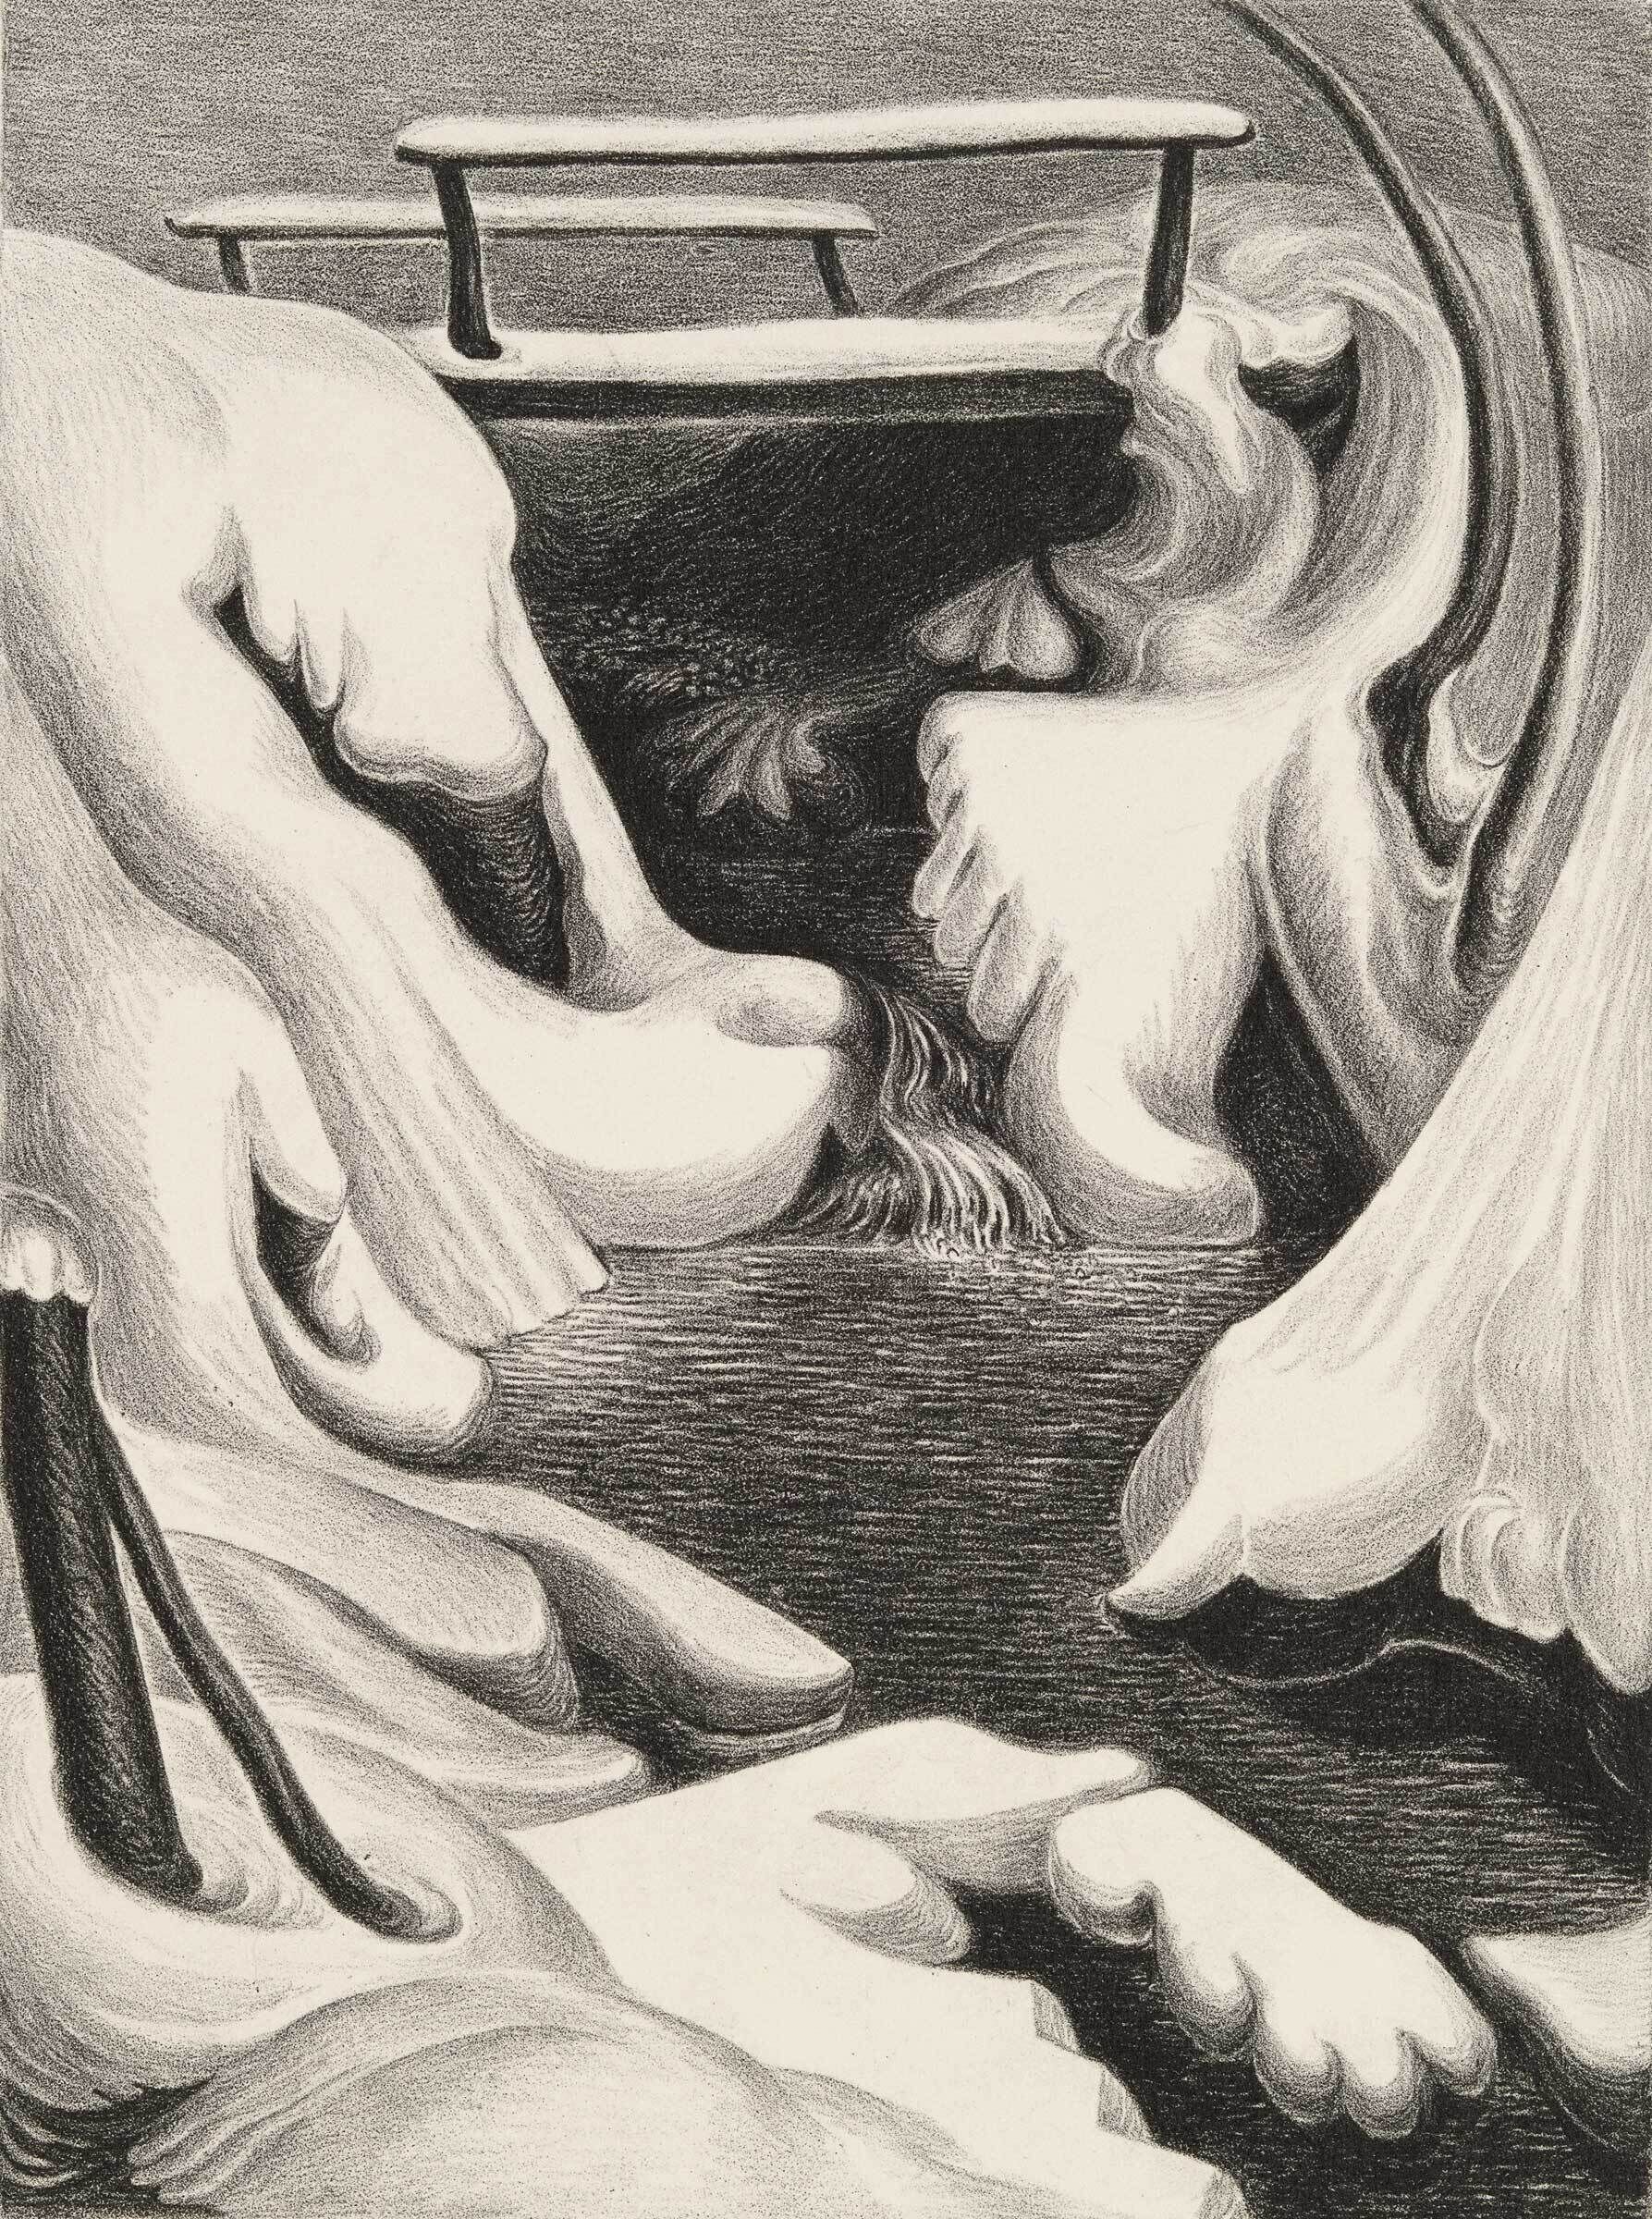 Surreal pencil drawing of distorted figures and objects with flowing lines and contrasting textures.